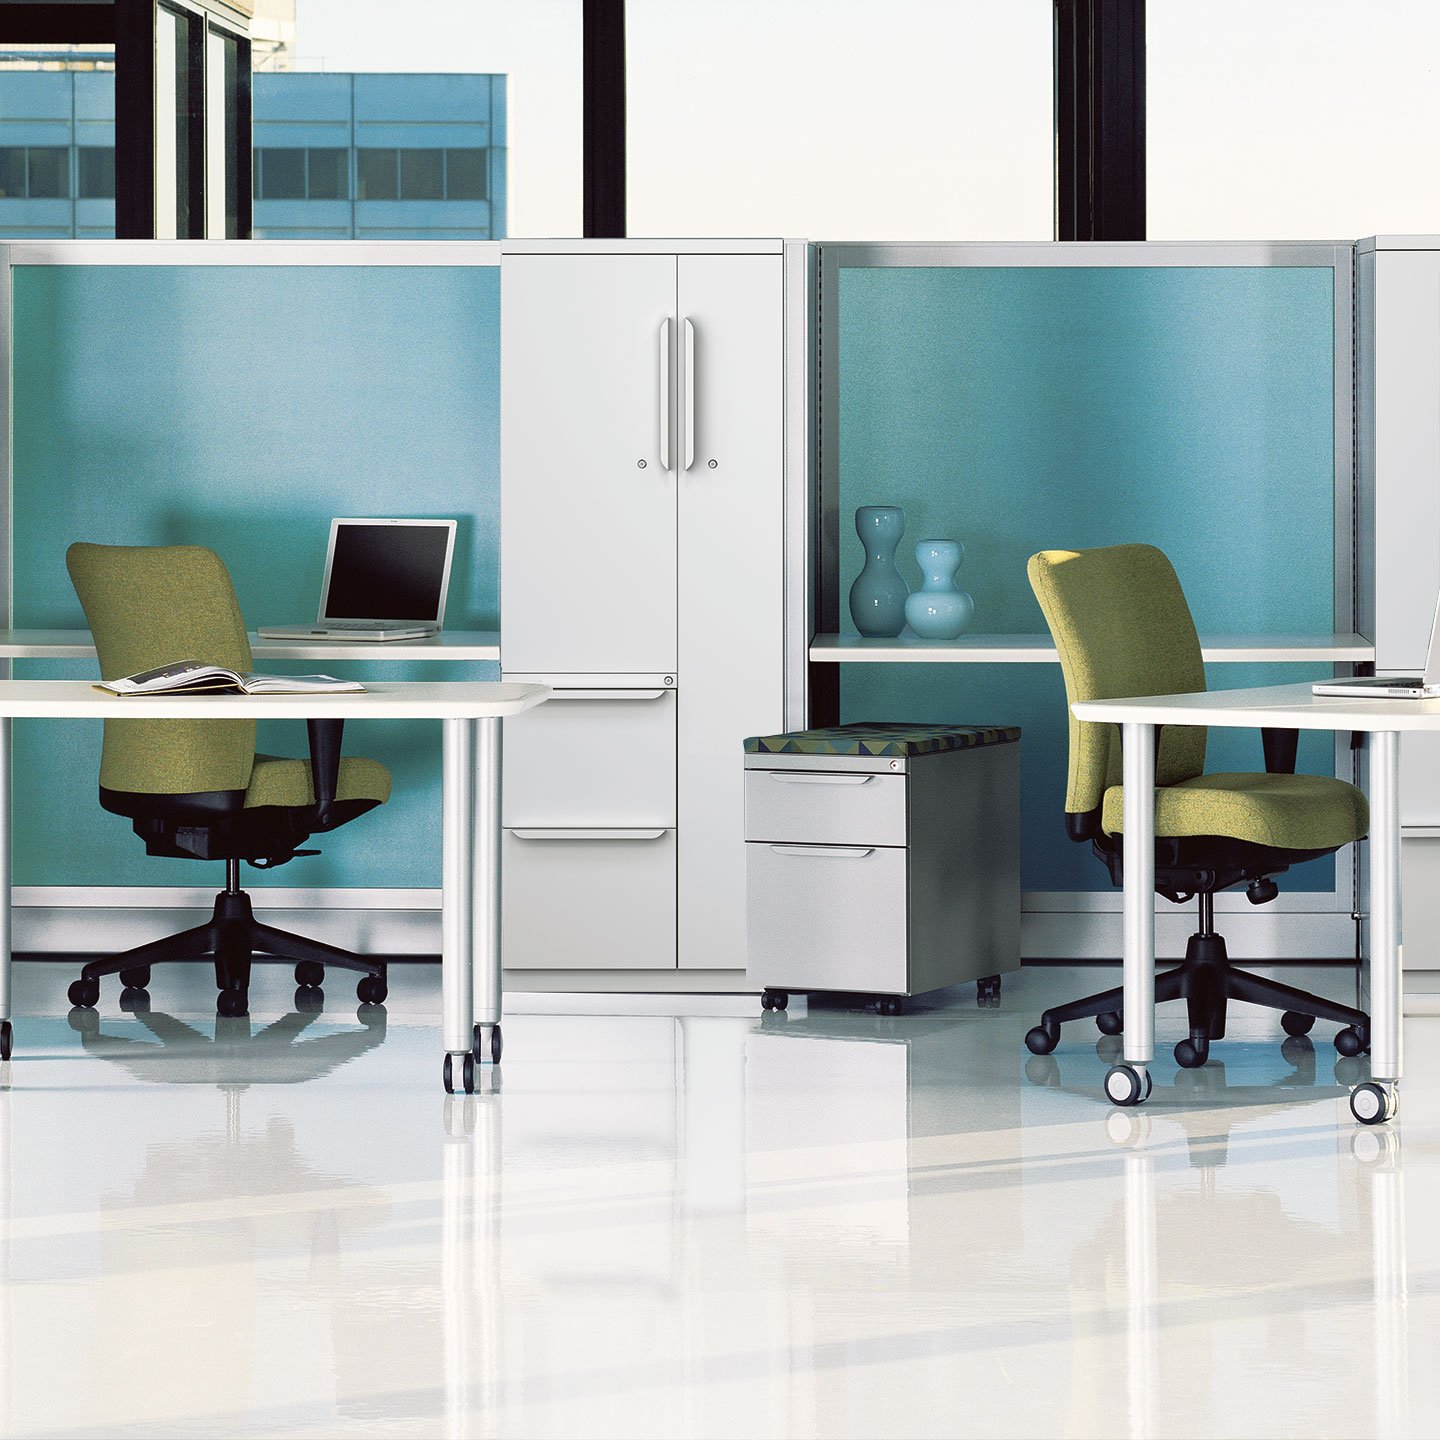 Haworth Unigroup Too Workspace with white desks and storage space with green chairs at desk in office